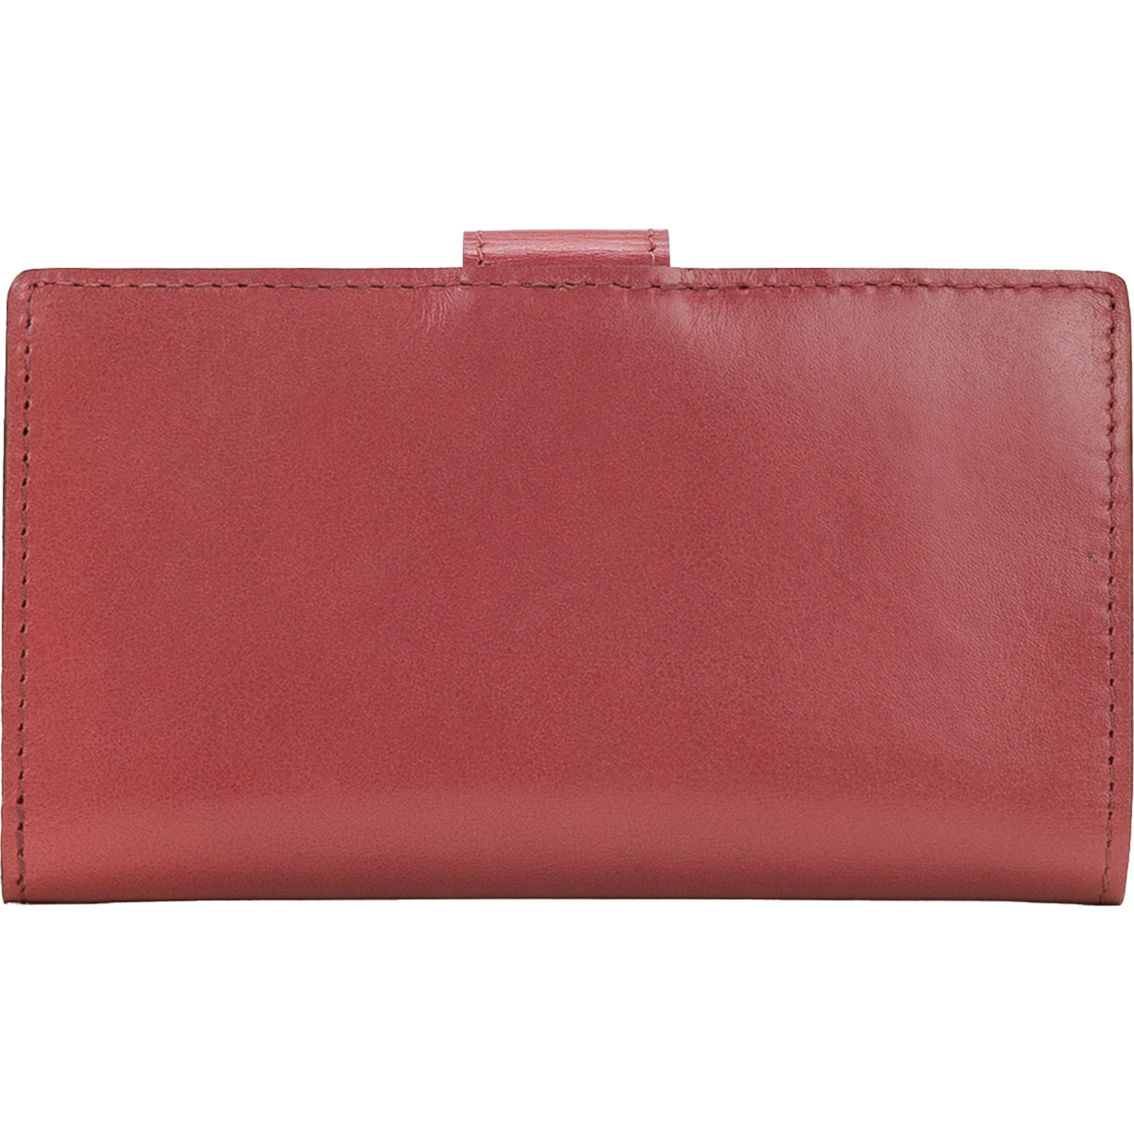 Patricia Nash Linnet Wallet | Wallets | Clothing & Accessories | Shop ...